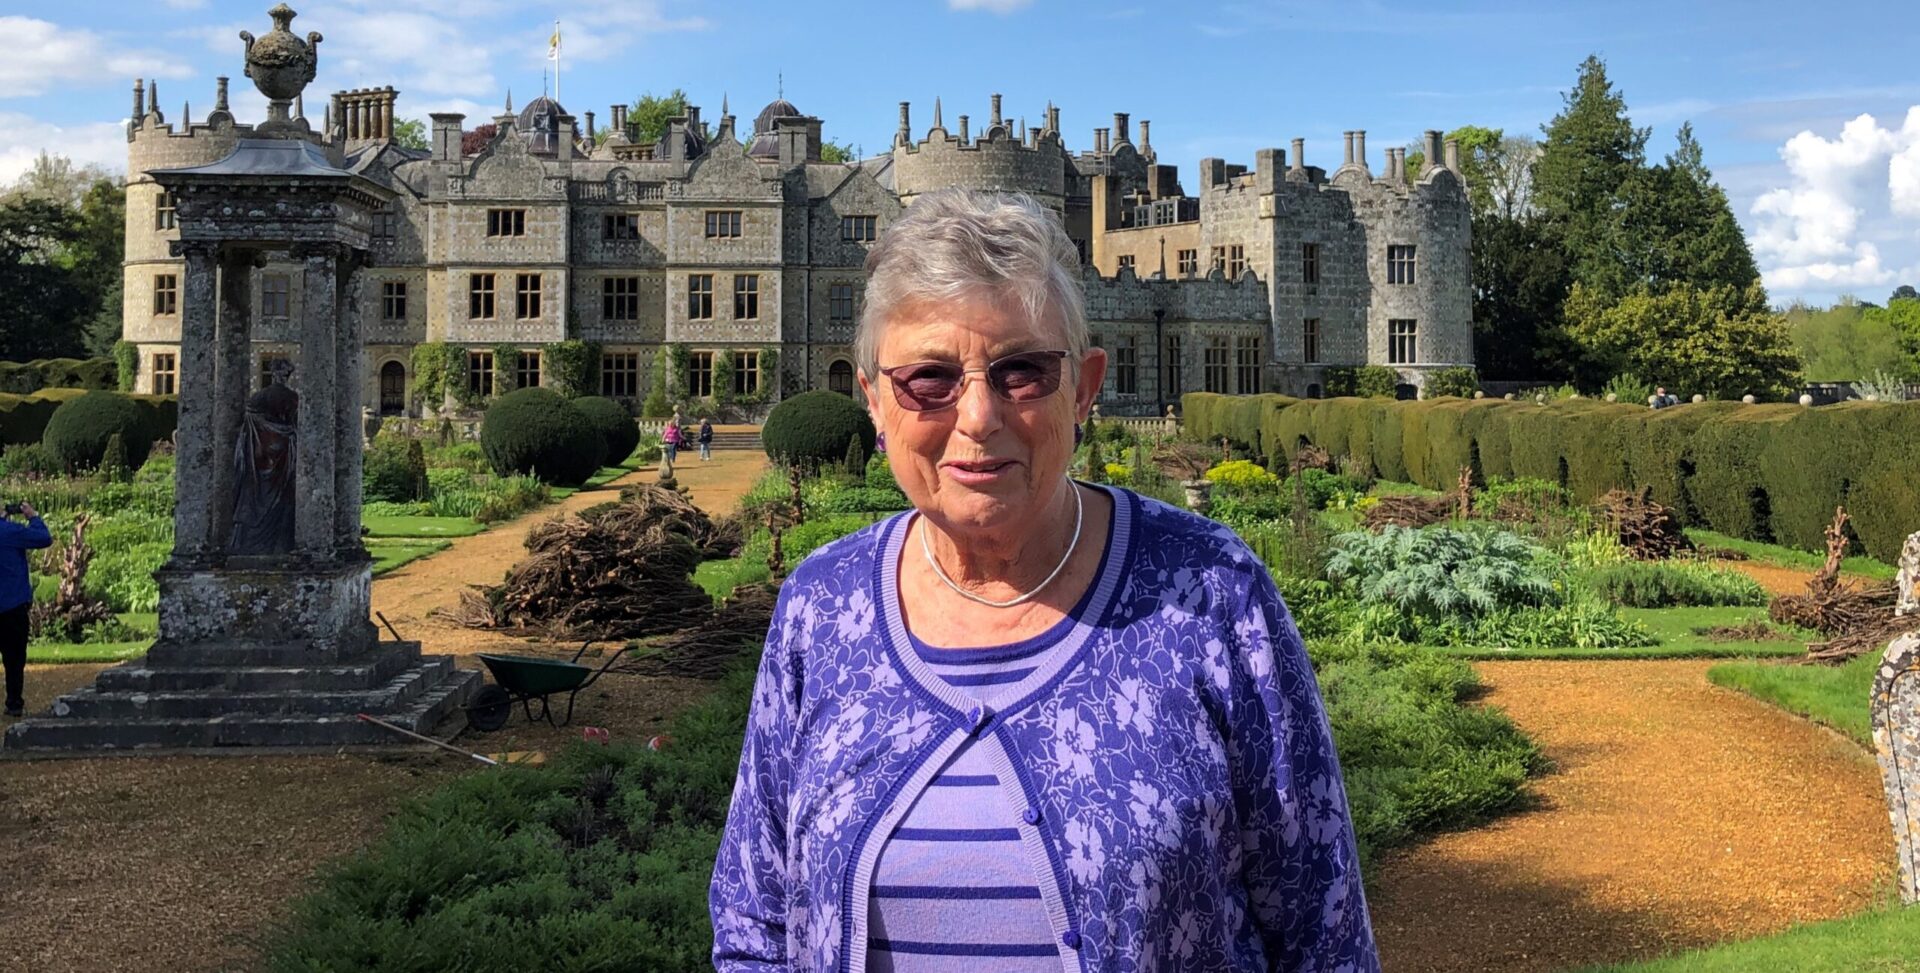 A woman stood outside an historic home in the countryside